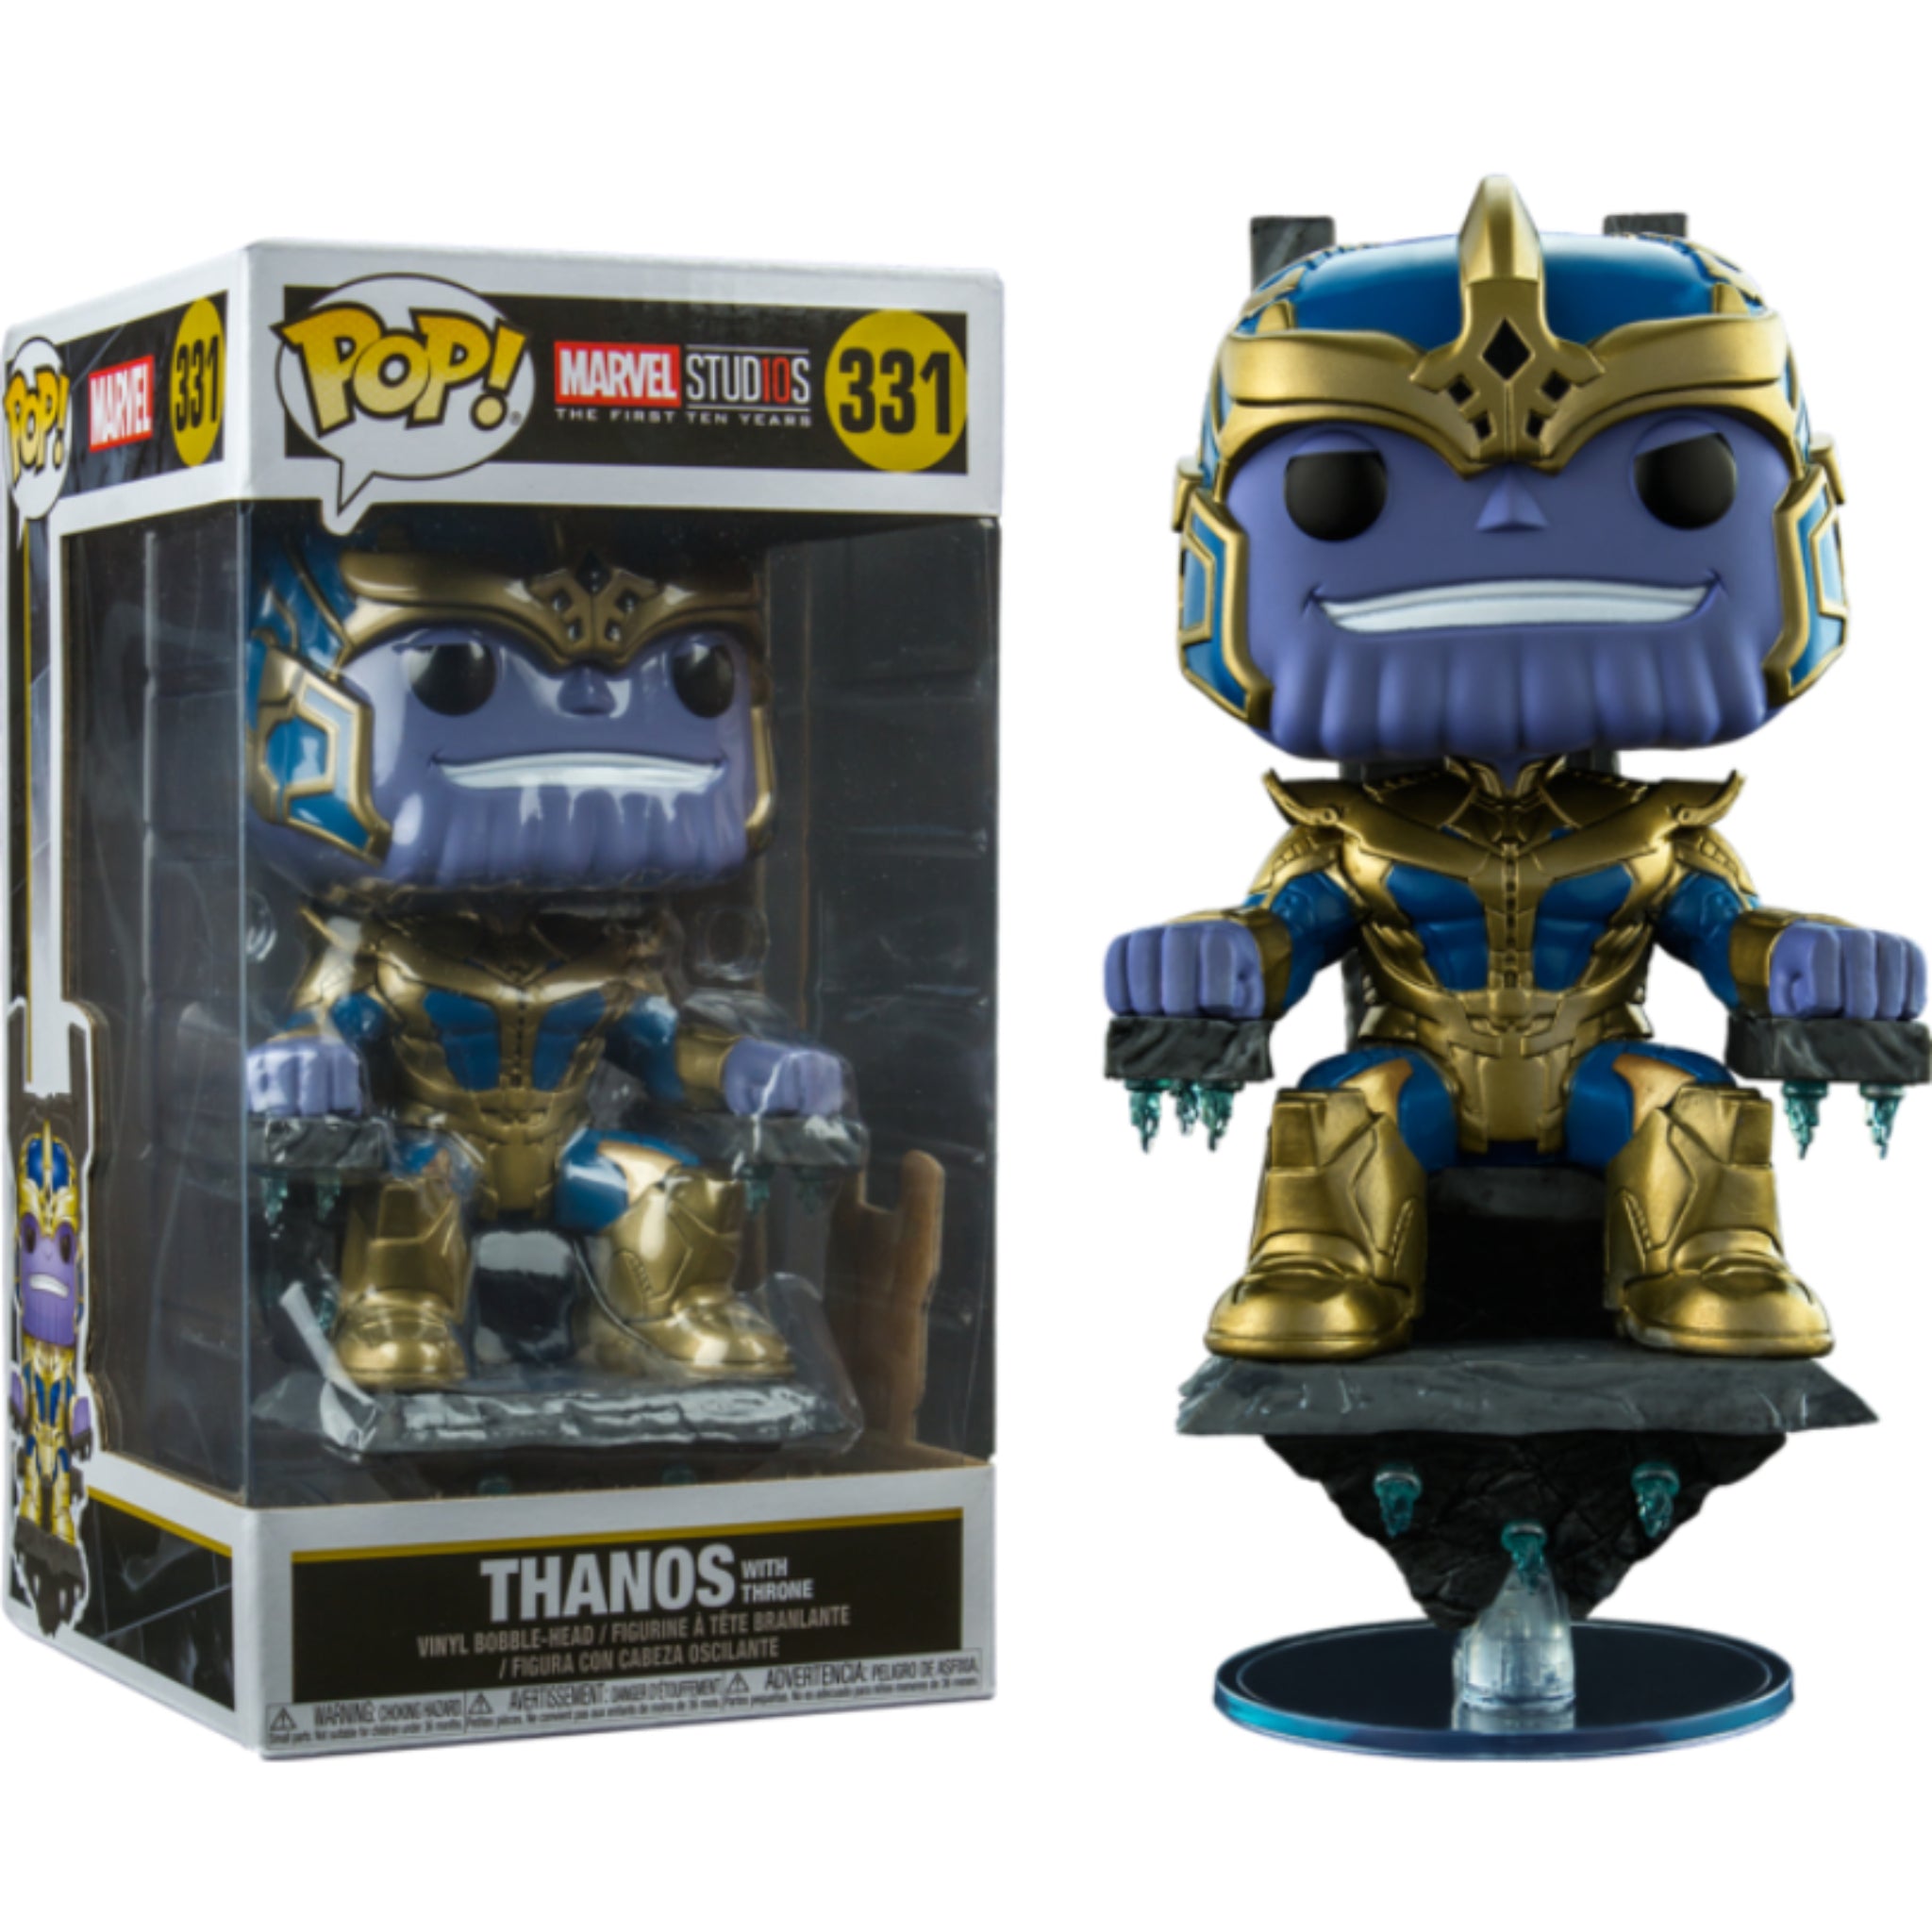 Marvel Studios The First Ten Years Thanos on Throne Deluxe Funko Pop! Vinyl Figure DAMAGED OUTER BOX